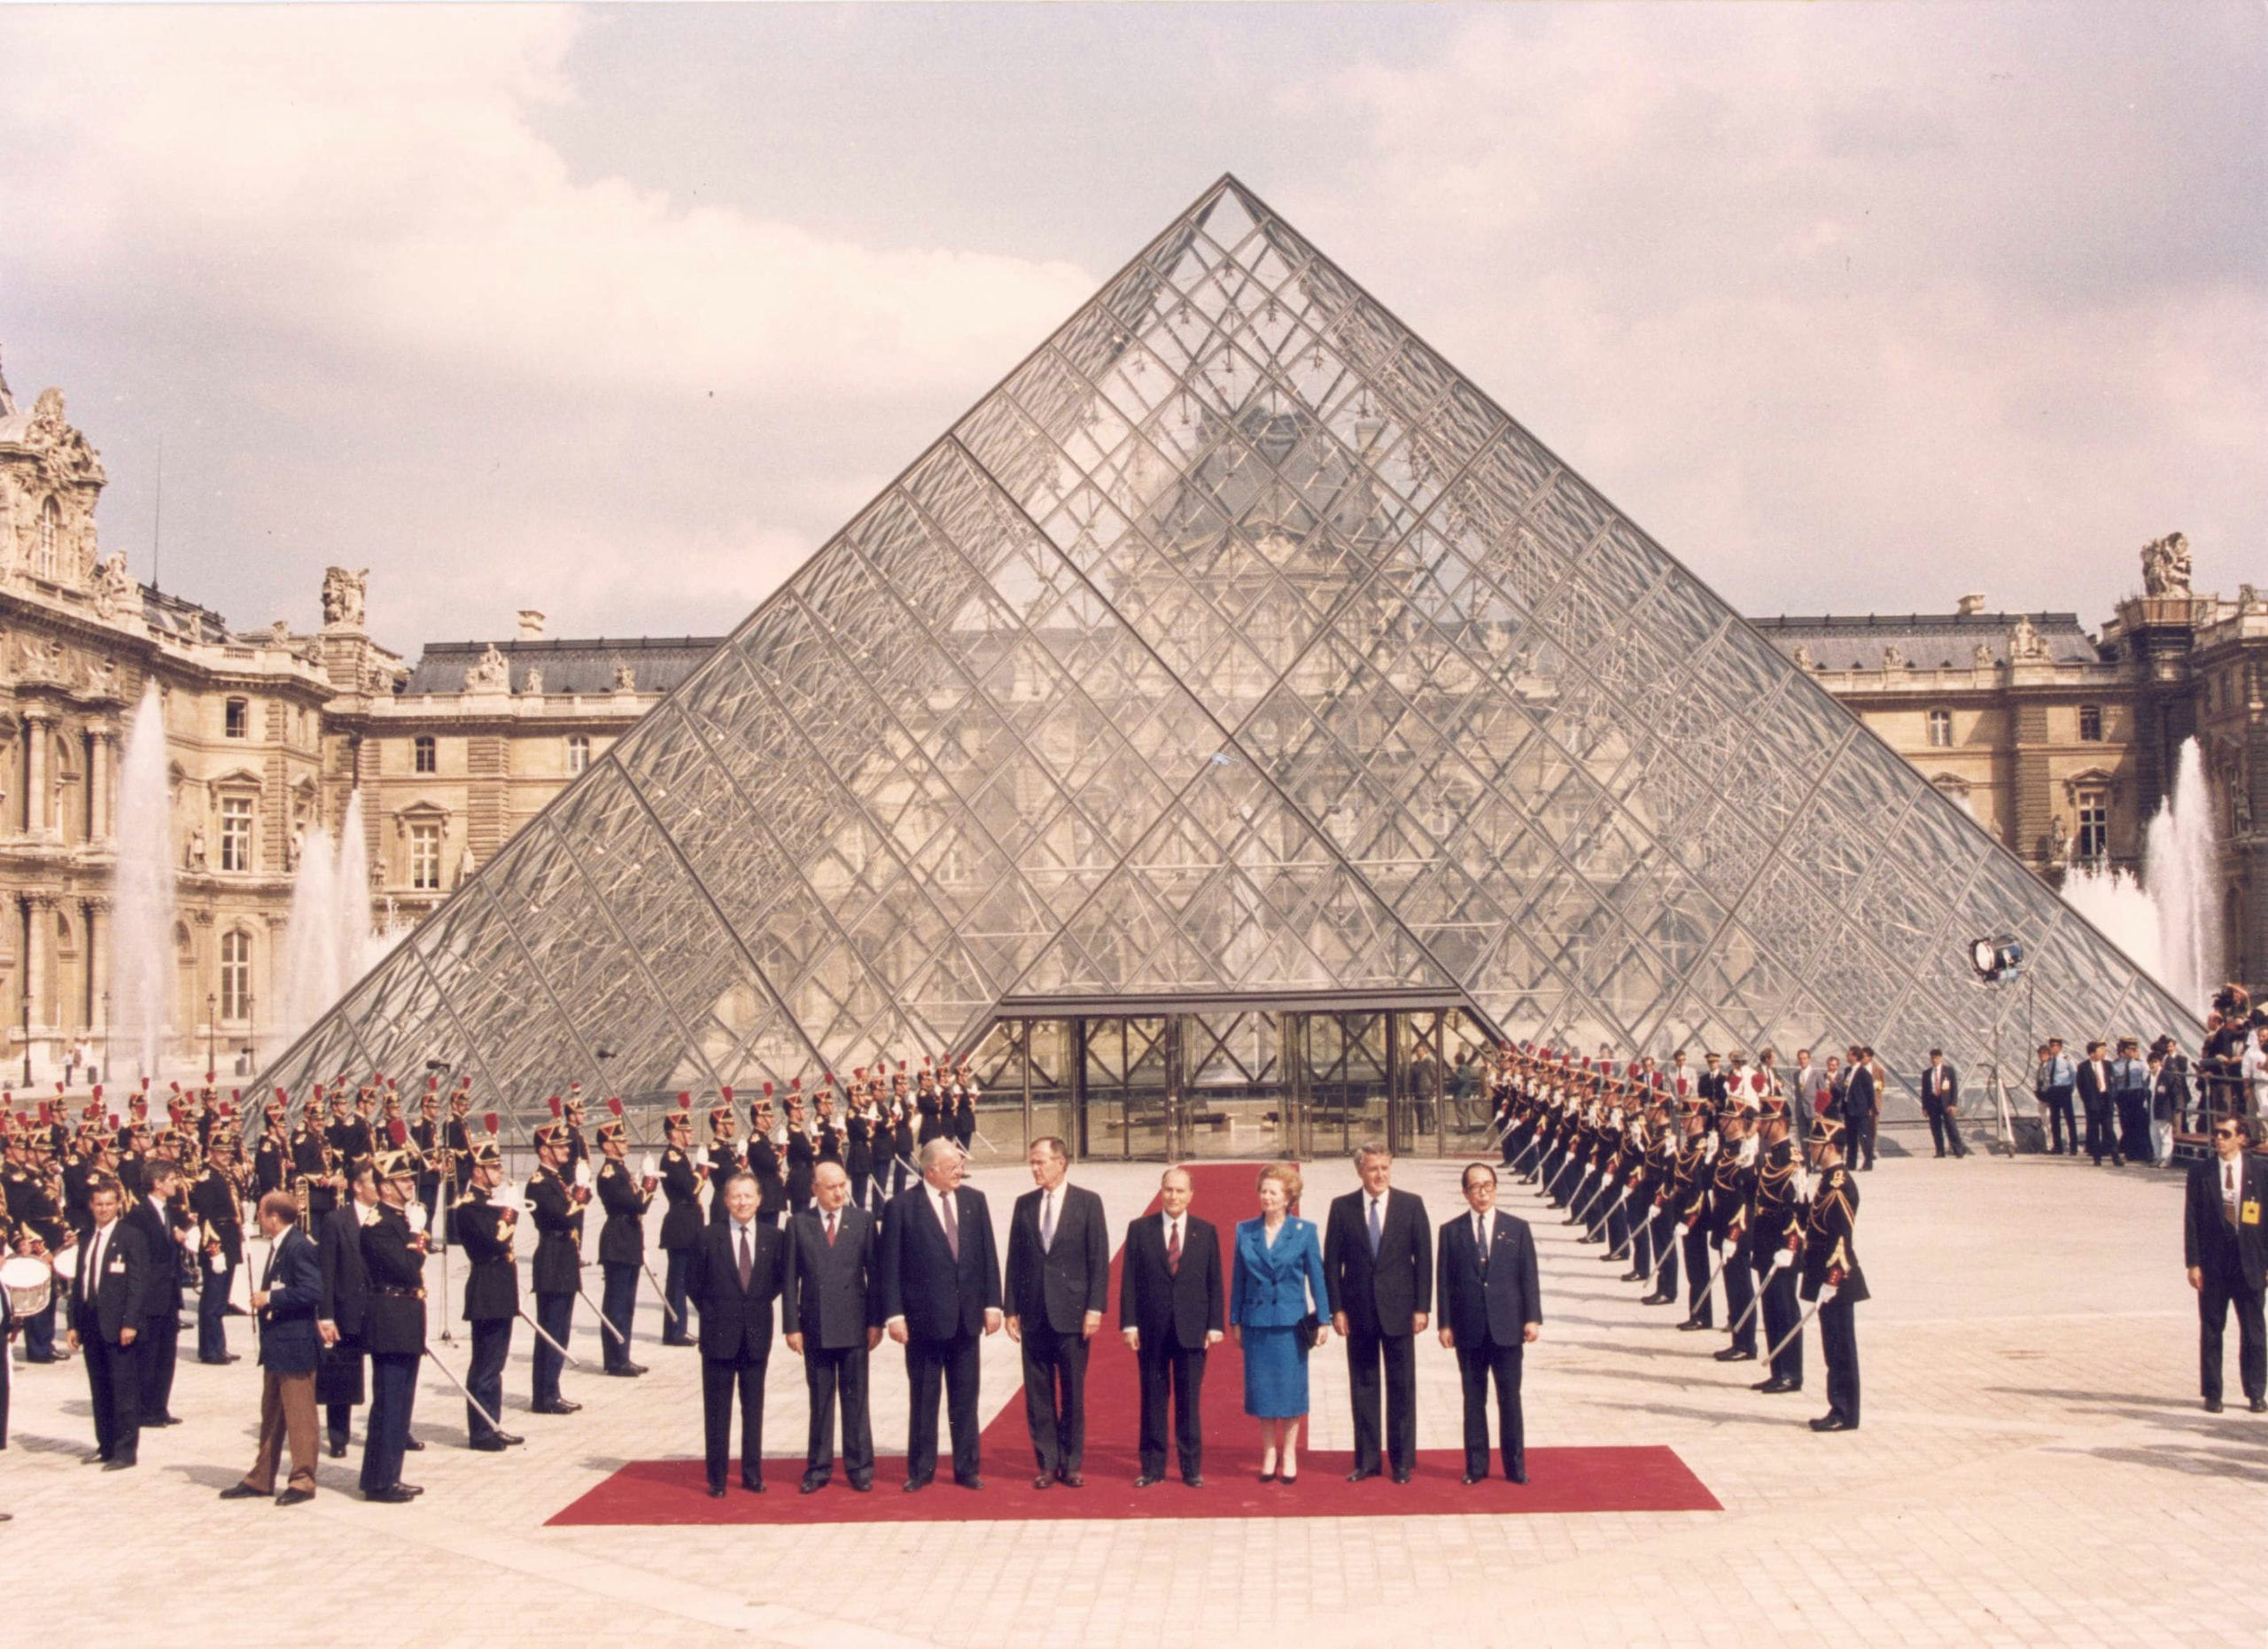 Inauguration on March 4, 1988 by François Mitterand of the Louvre Pyramid